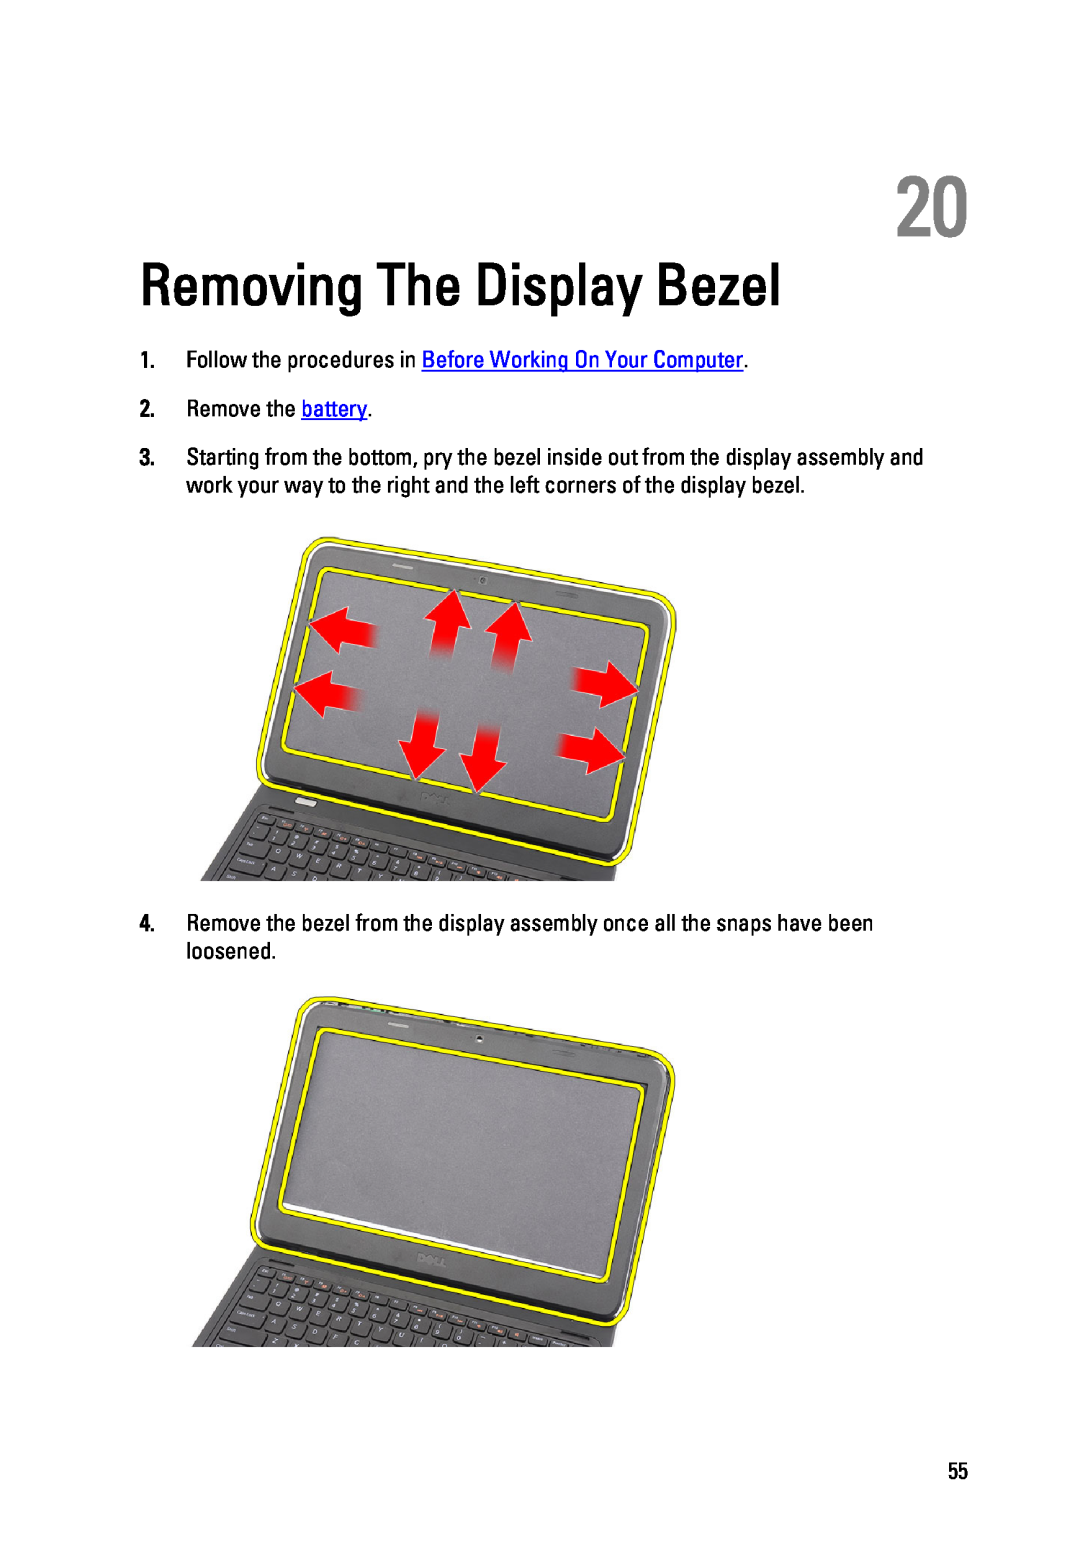 Dell P22G Removing The Display Bezel, Follow the procedures in Before Working On Your Computer, Remove the battery 